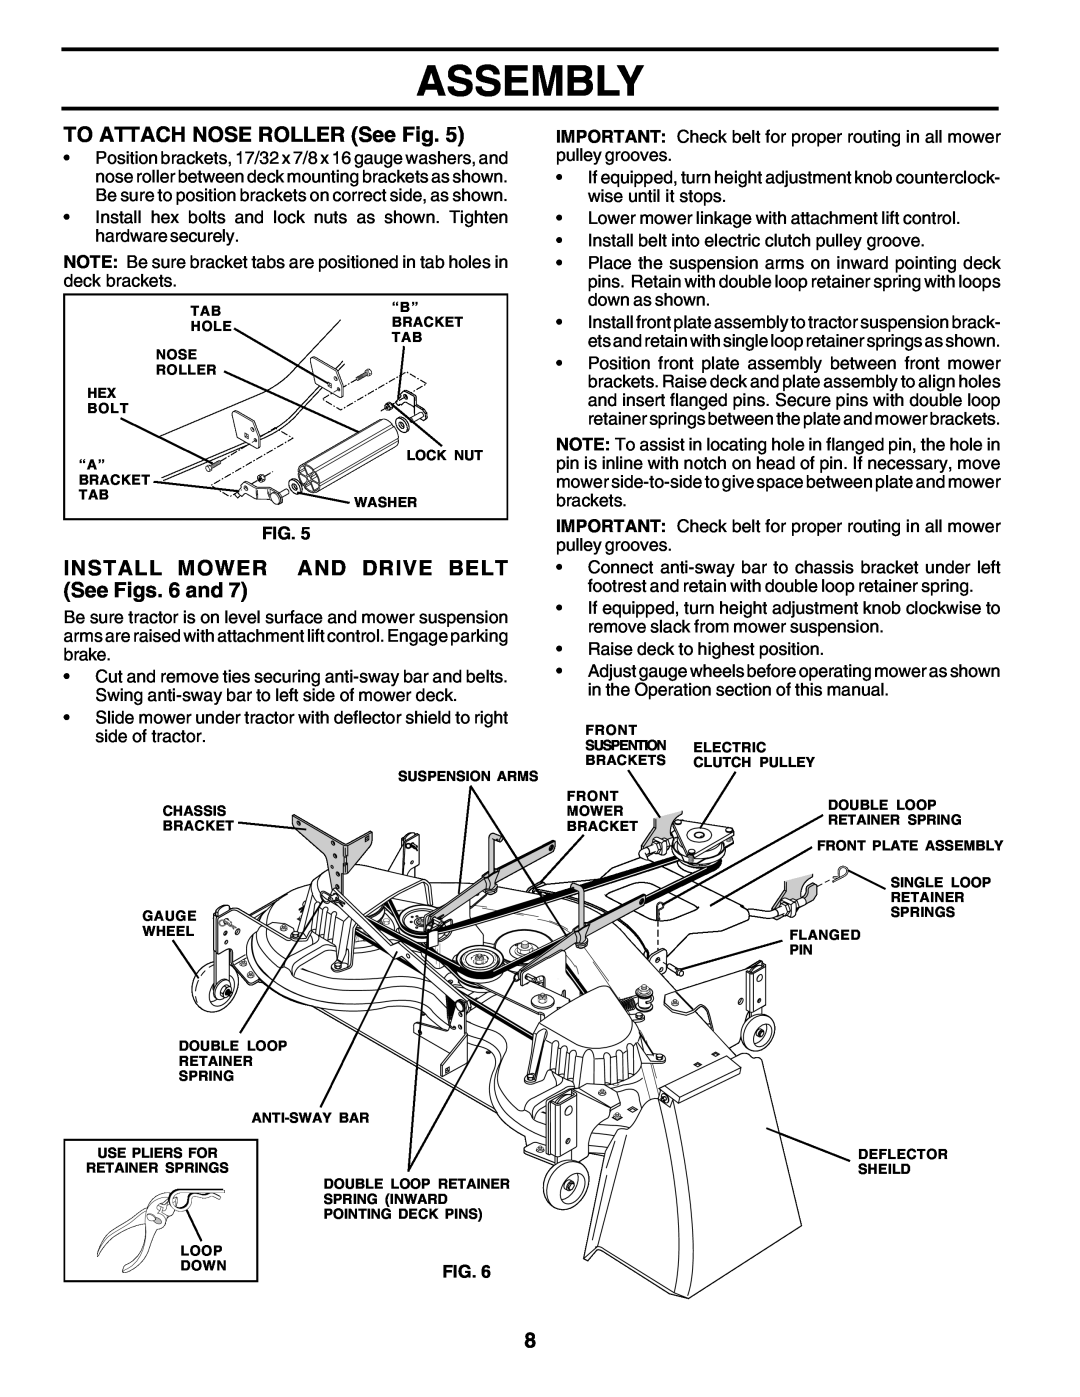 Poulan 178497 owner manual Assembly, TO ATTACH NOSE ROLLER See Fig, INSTALL MOWER AND DRIVE BELT See Figs. 6 and 